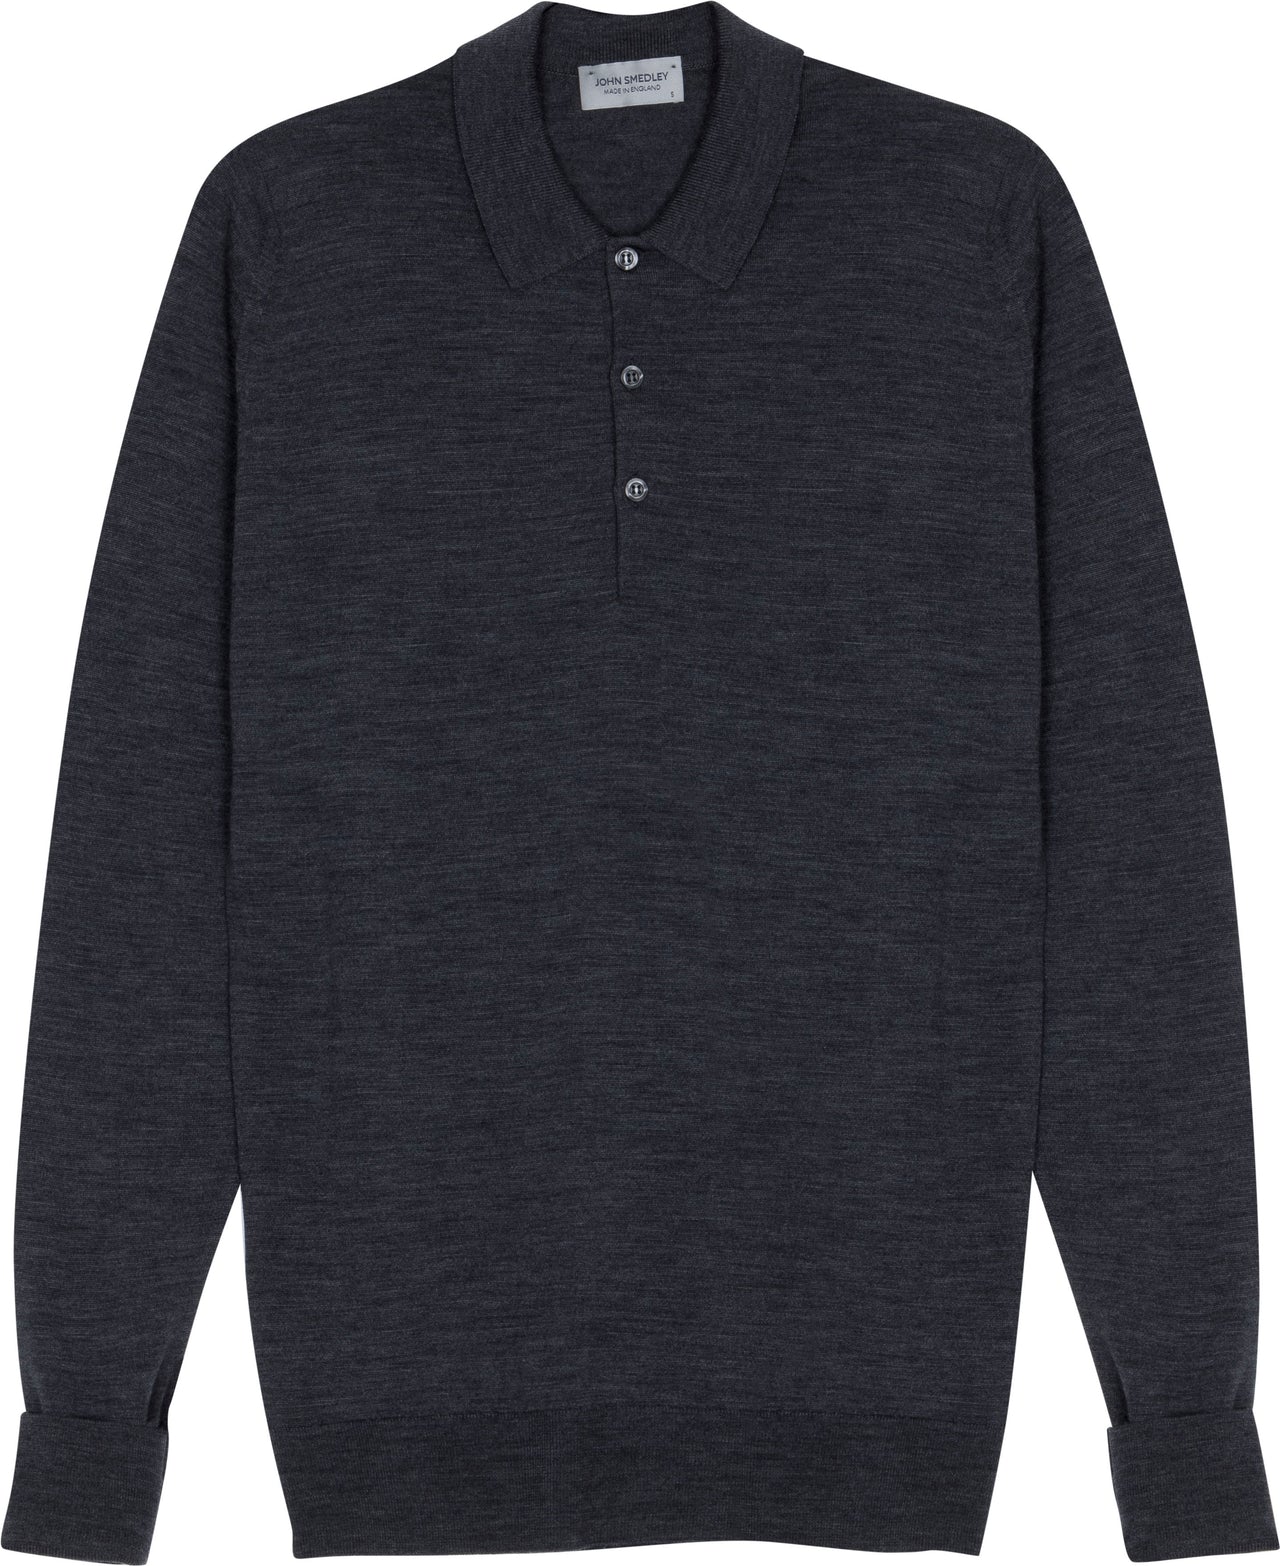 HENRY SARTORIAL X JOHN SMEDLEY Cotswold - Extra fine Merino Wool Polo CHARCOAL